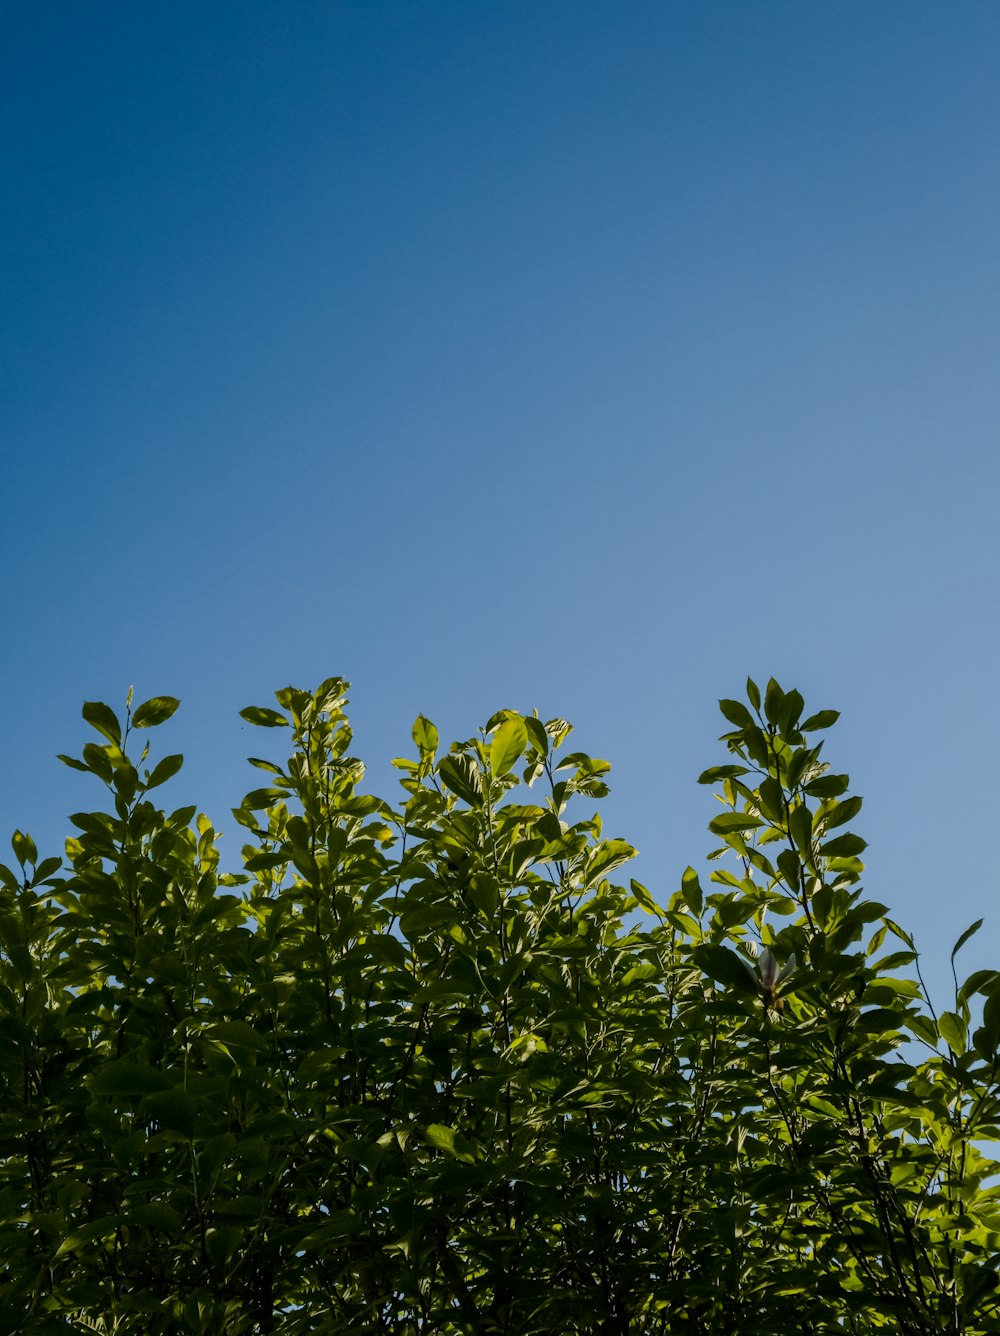 a clear blue sky is seen through the leaves of a tree